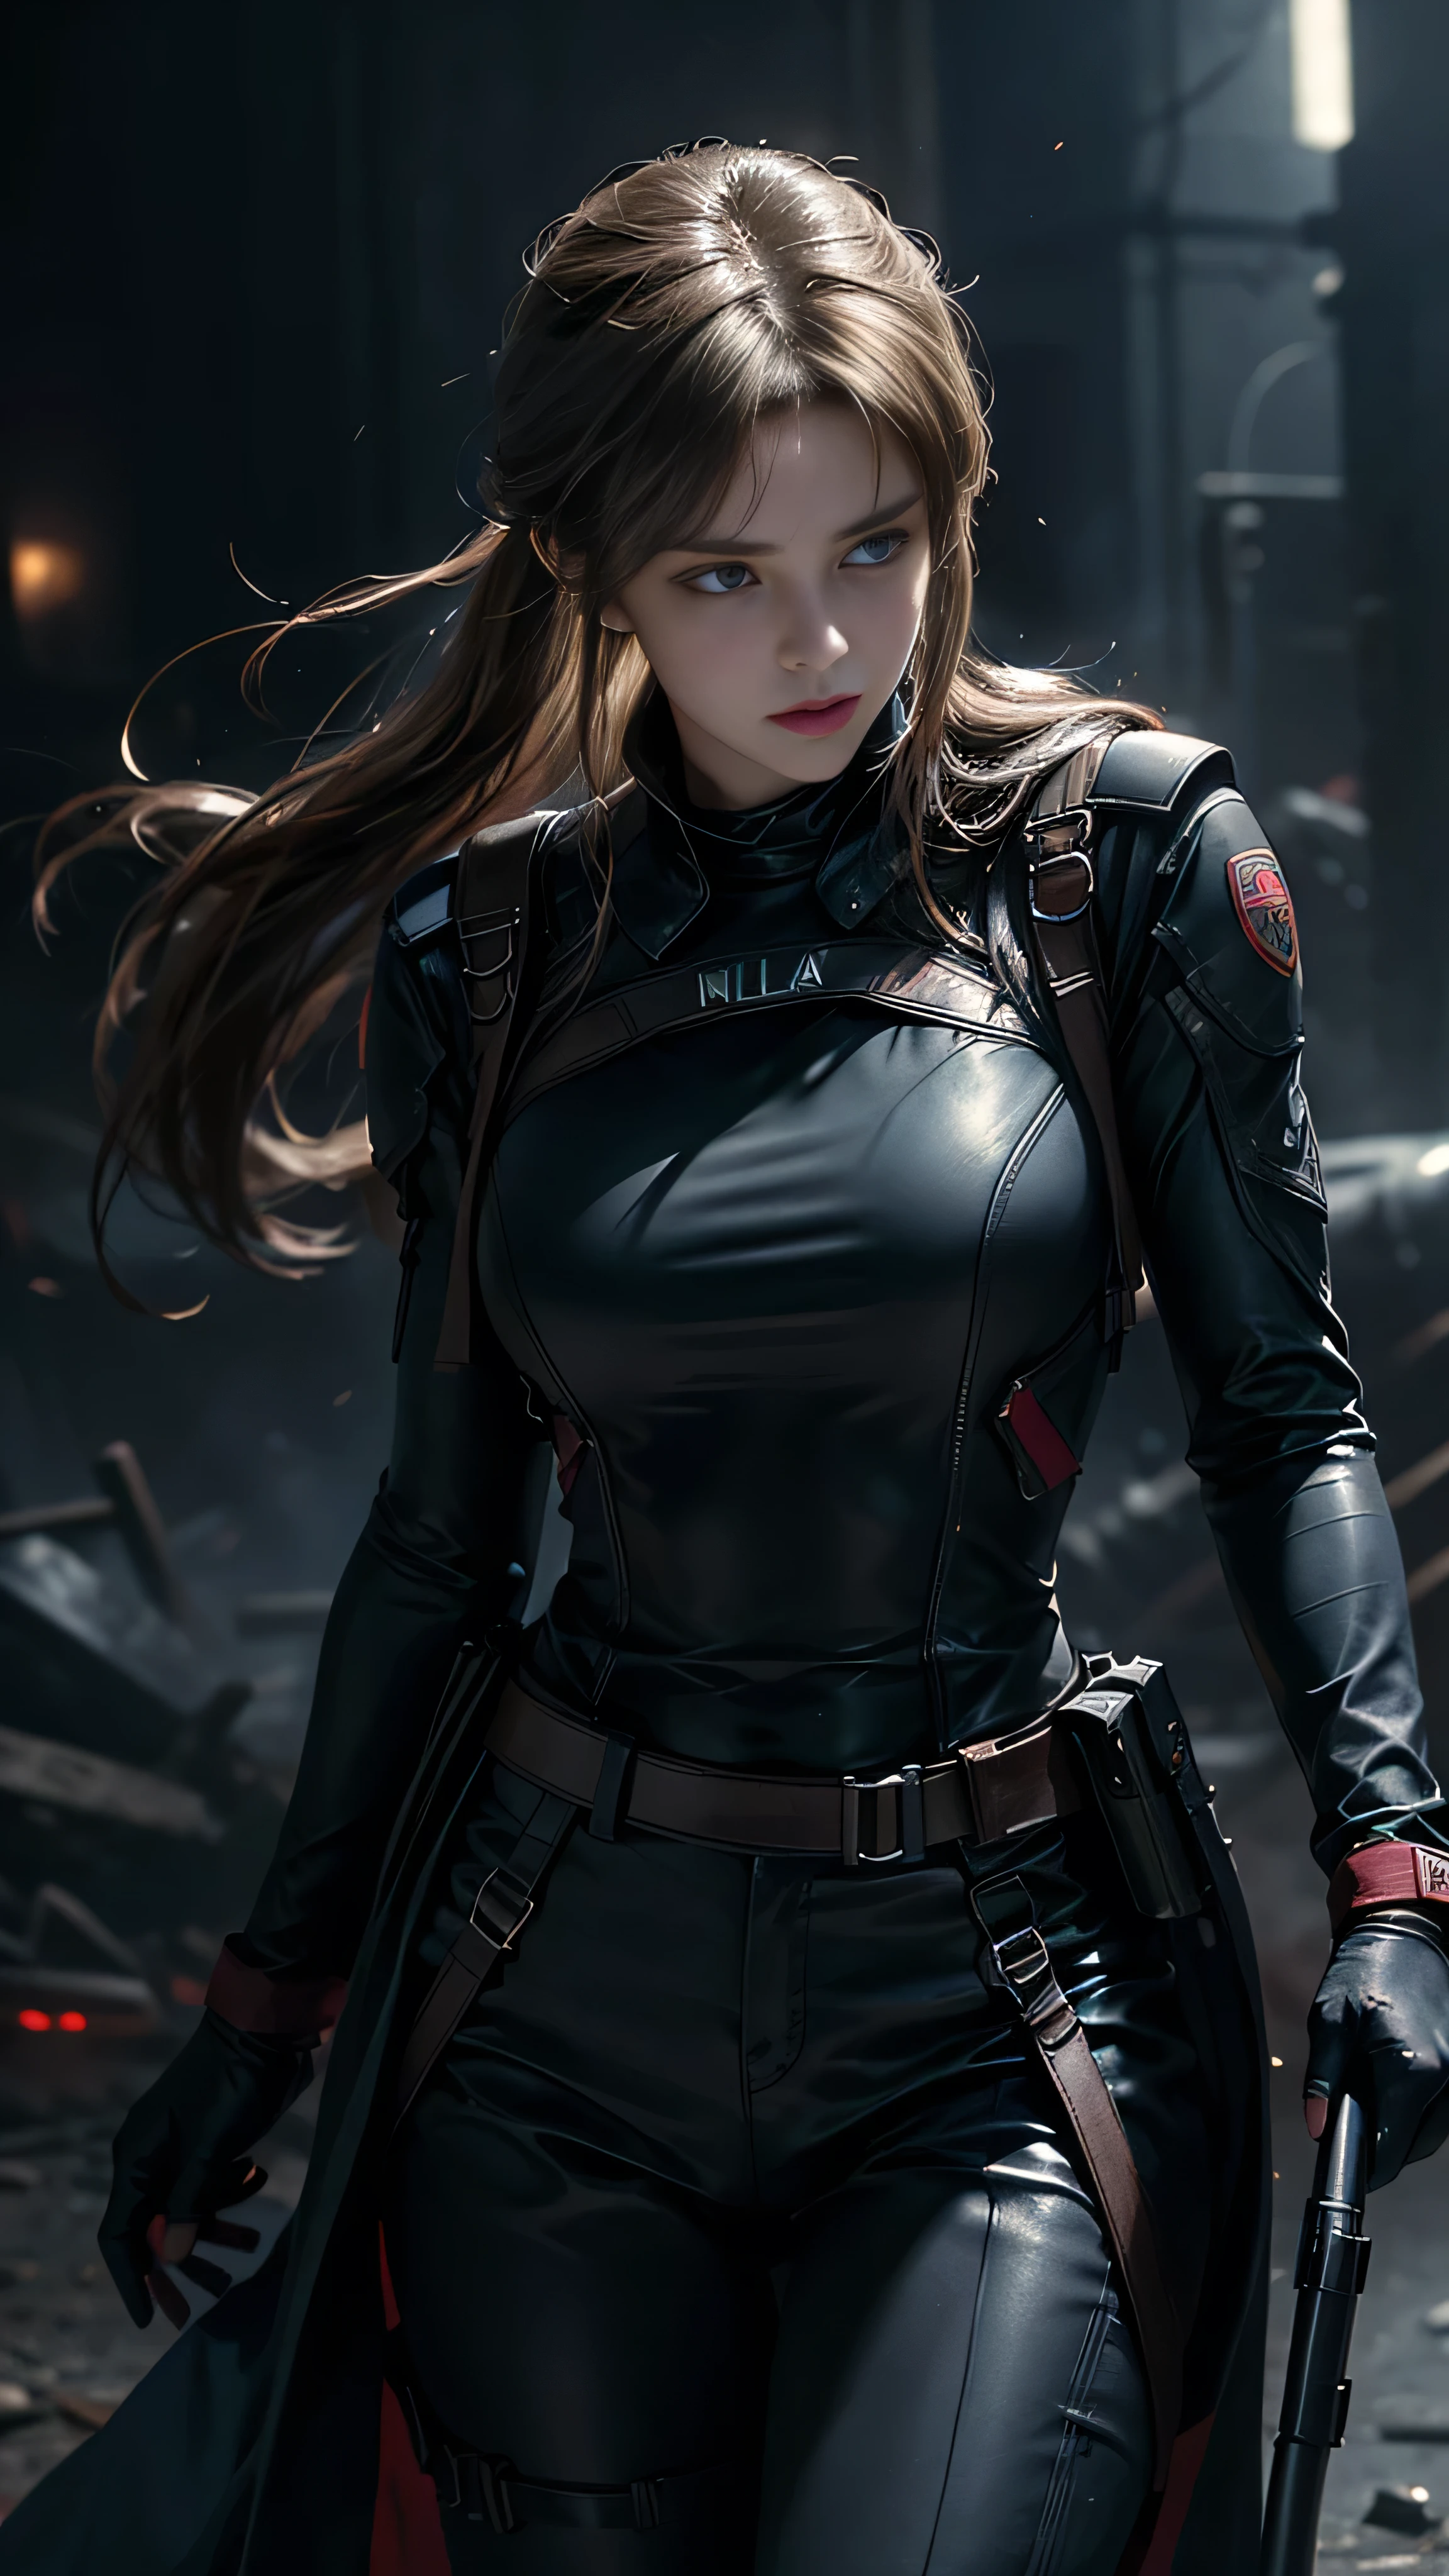 Movie 'Resident Evil: Apocalypse', a thrilling high-definition scene unfolds. The unwavering determination of the main character, Jill Valentine, is conveyed in this meticulously depicted moment.

In the ensuing chaos and dynamic lighting, Jill, dressed in her official Resident Evil uniform, skillfully aims her gun at the threatening zombie. Her long, flowing hair sways gently, casting deep shadows that highlight her chiseled features and fierce expression.

Jill's face is a perfect blend of intensity and focus, beautifully and detailed with deep eyes, the gaze fixed on the threat before her. Her fingers are curled deftly, poised